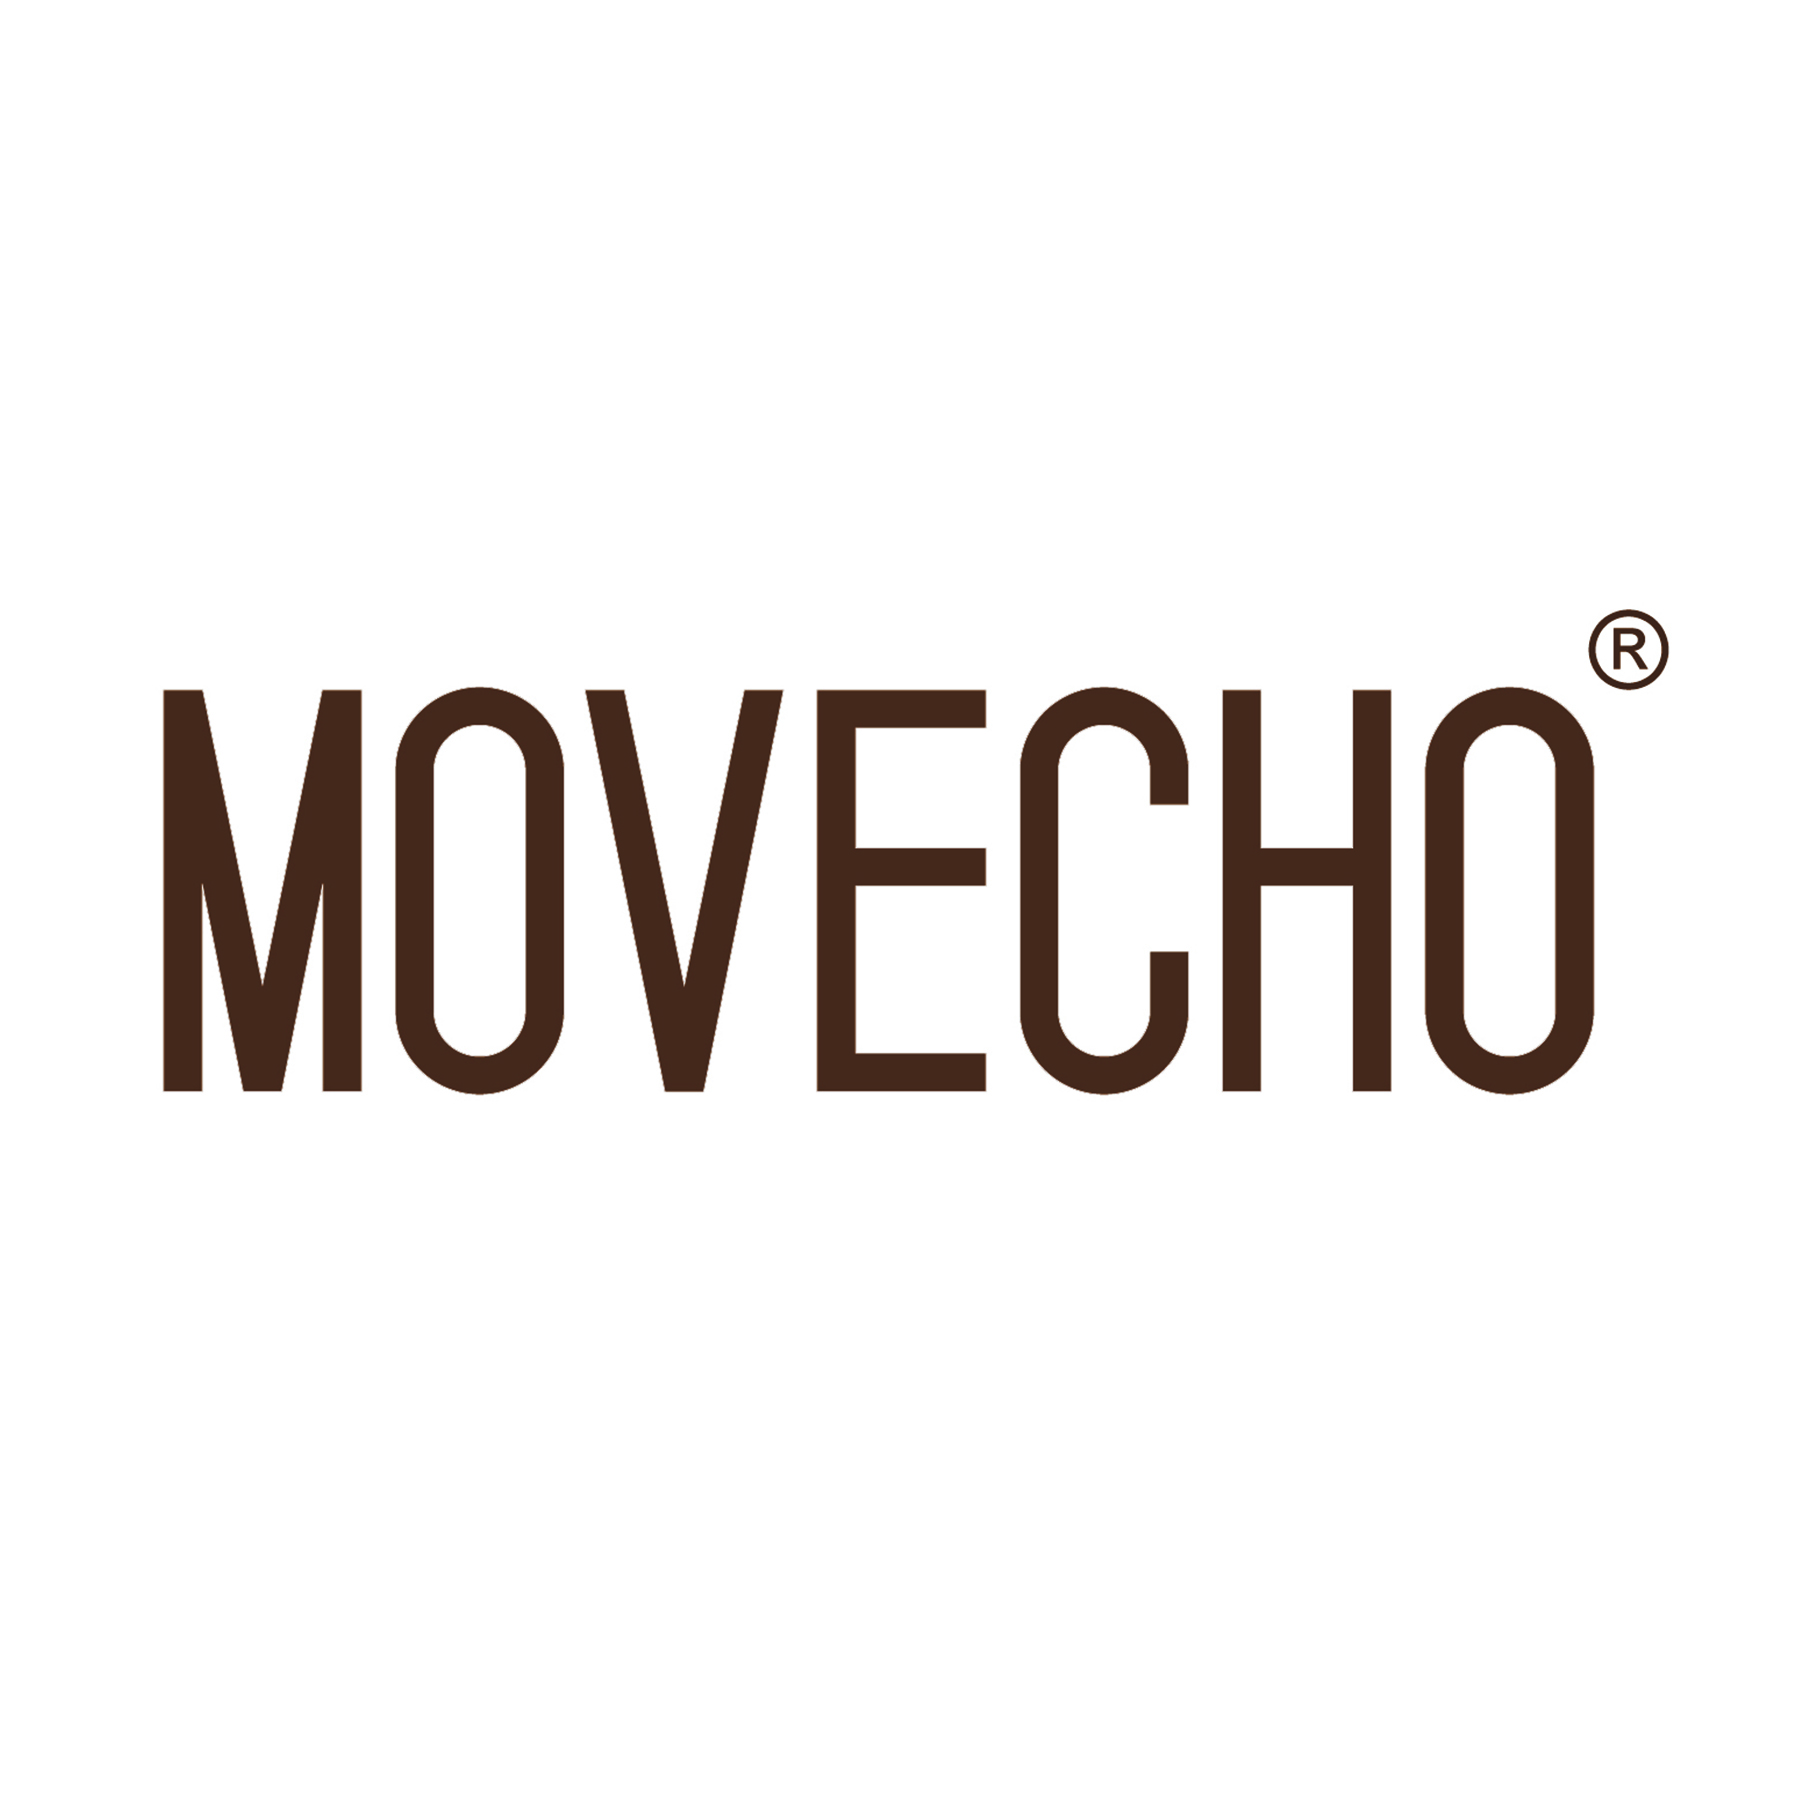 MOVECHO